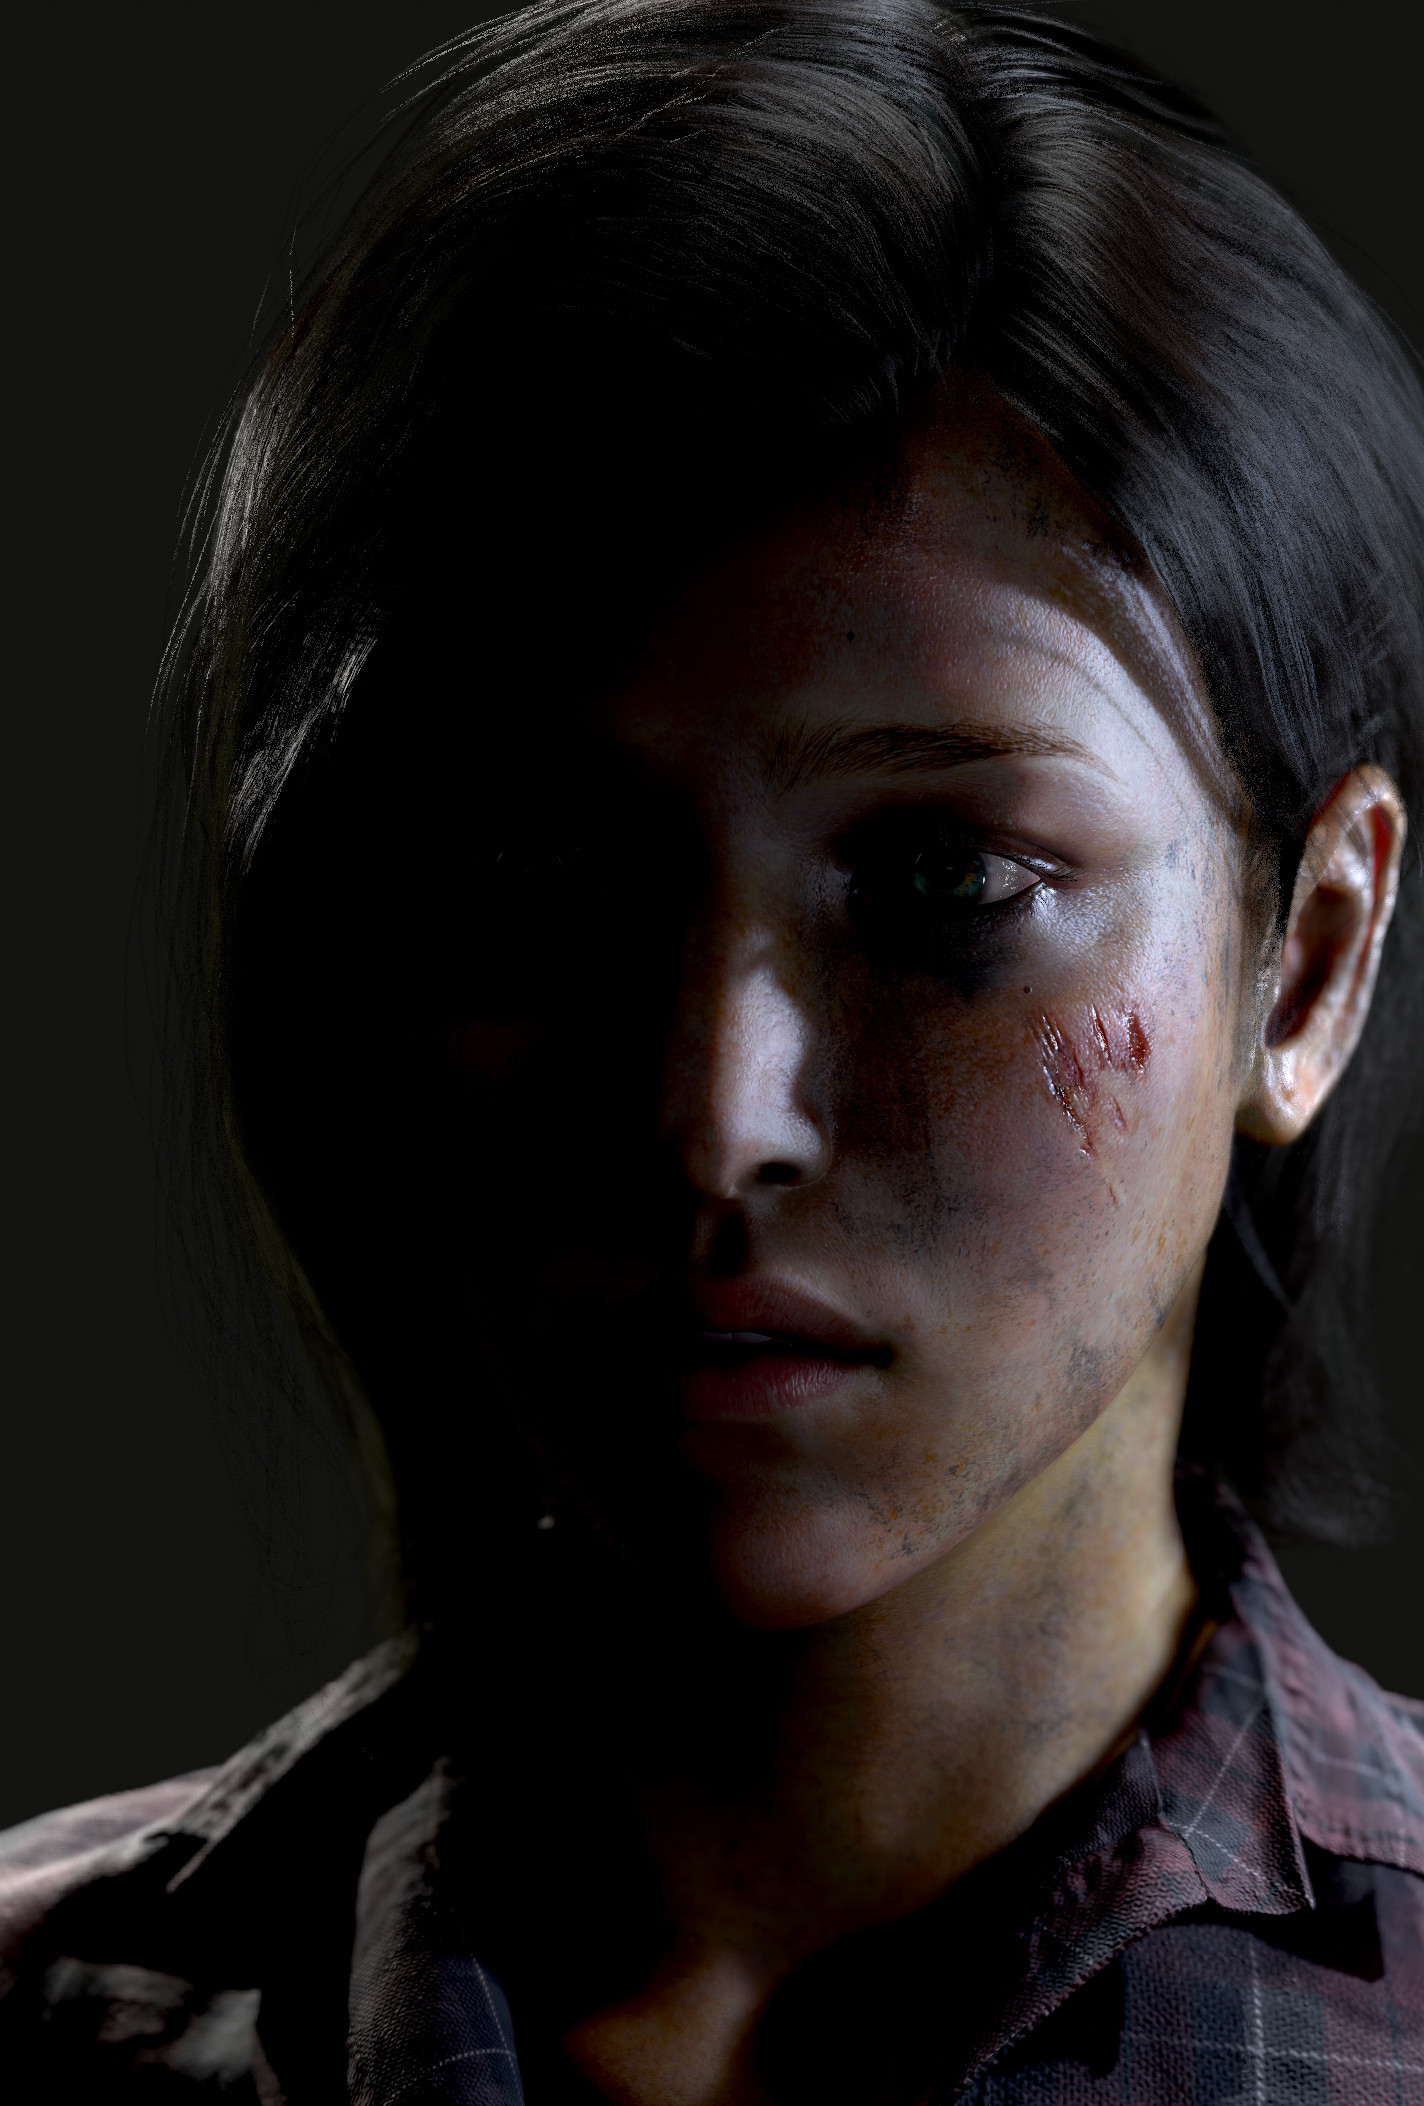 The Making of Re-imagined Ellie (The Last of Us Fanart) — RAY LE